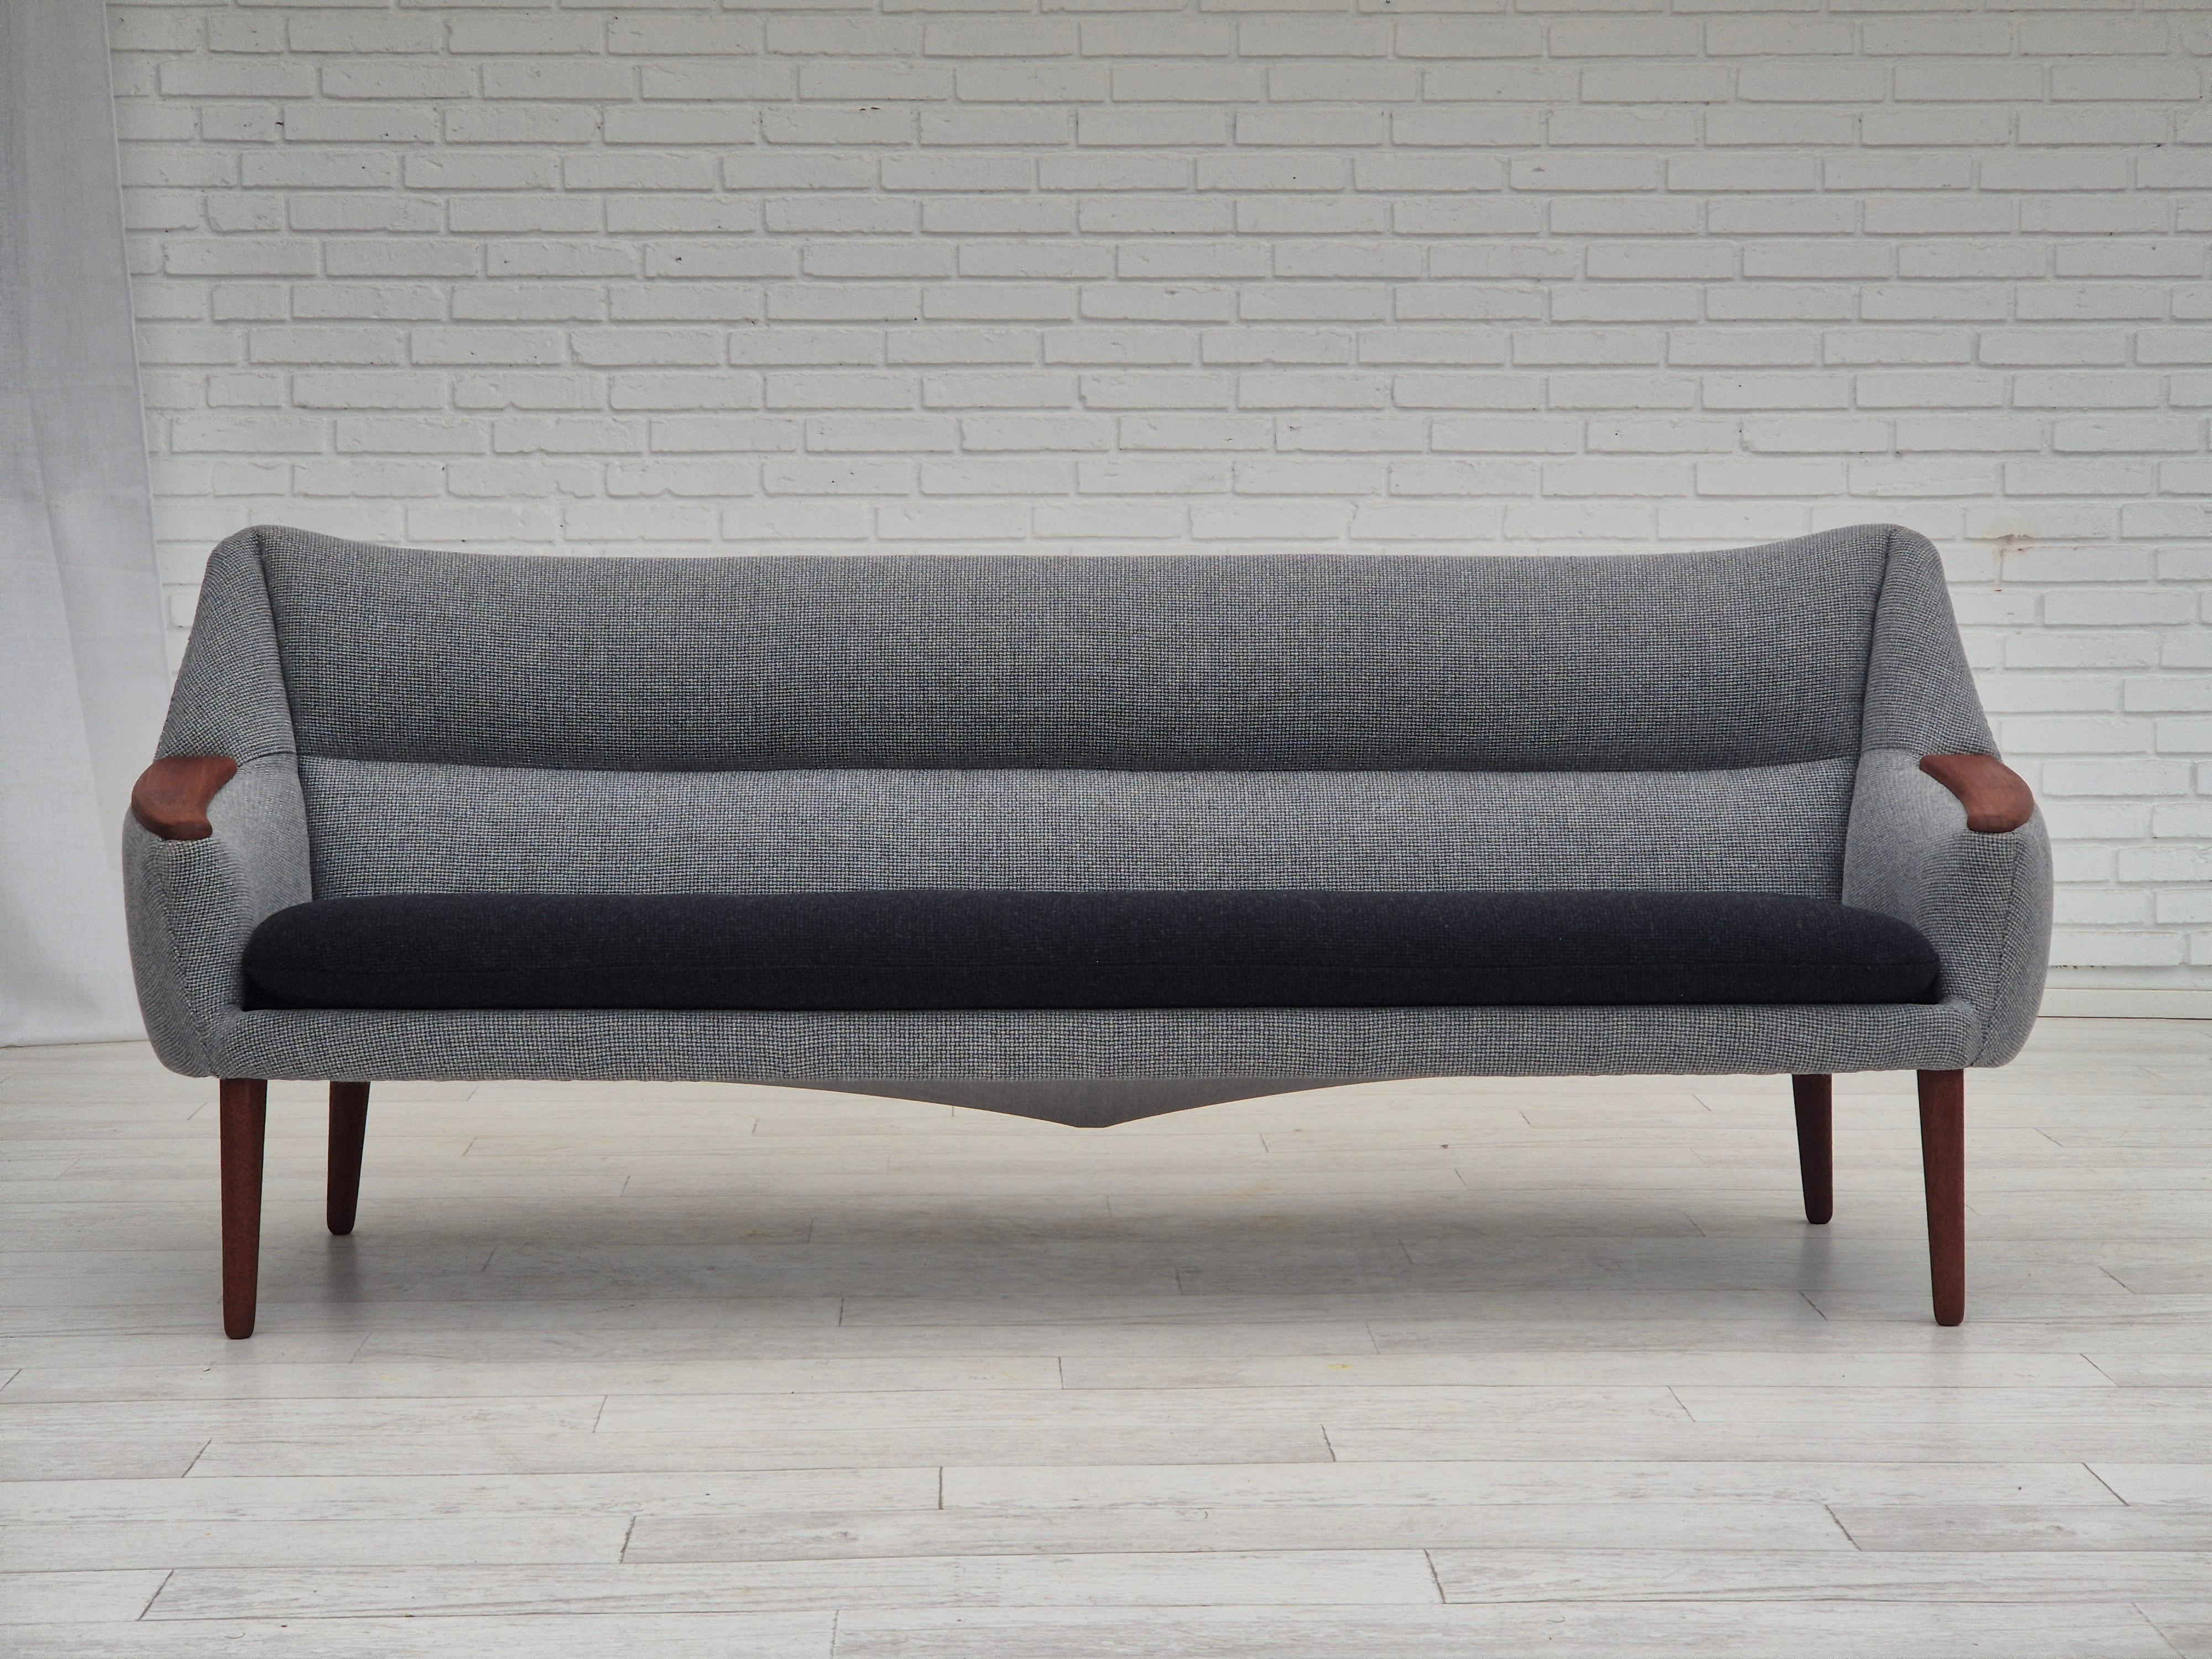 1960s, Danish sofa by Kurt Østervig model 58. Completely renovation: new upholstery, new elastic belts, wooden construction checked, legs and armrests renewed, brand new seat cushion. Upholstered in quality furniture wool 